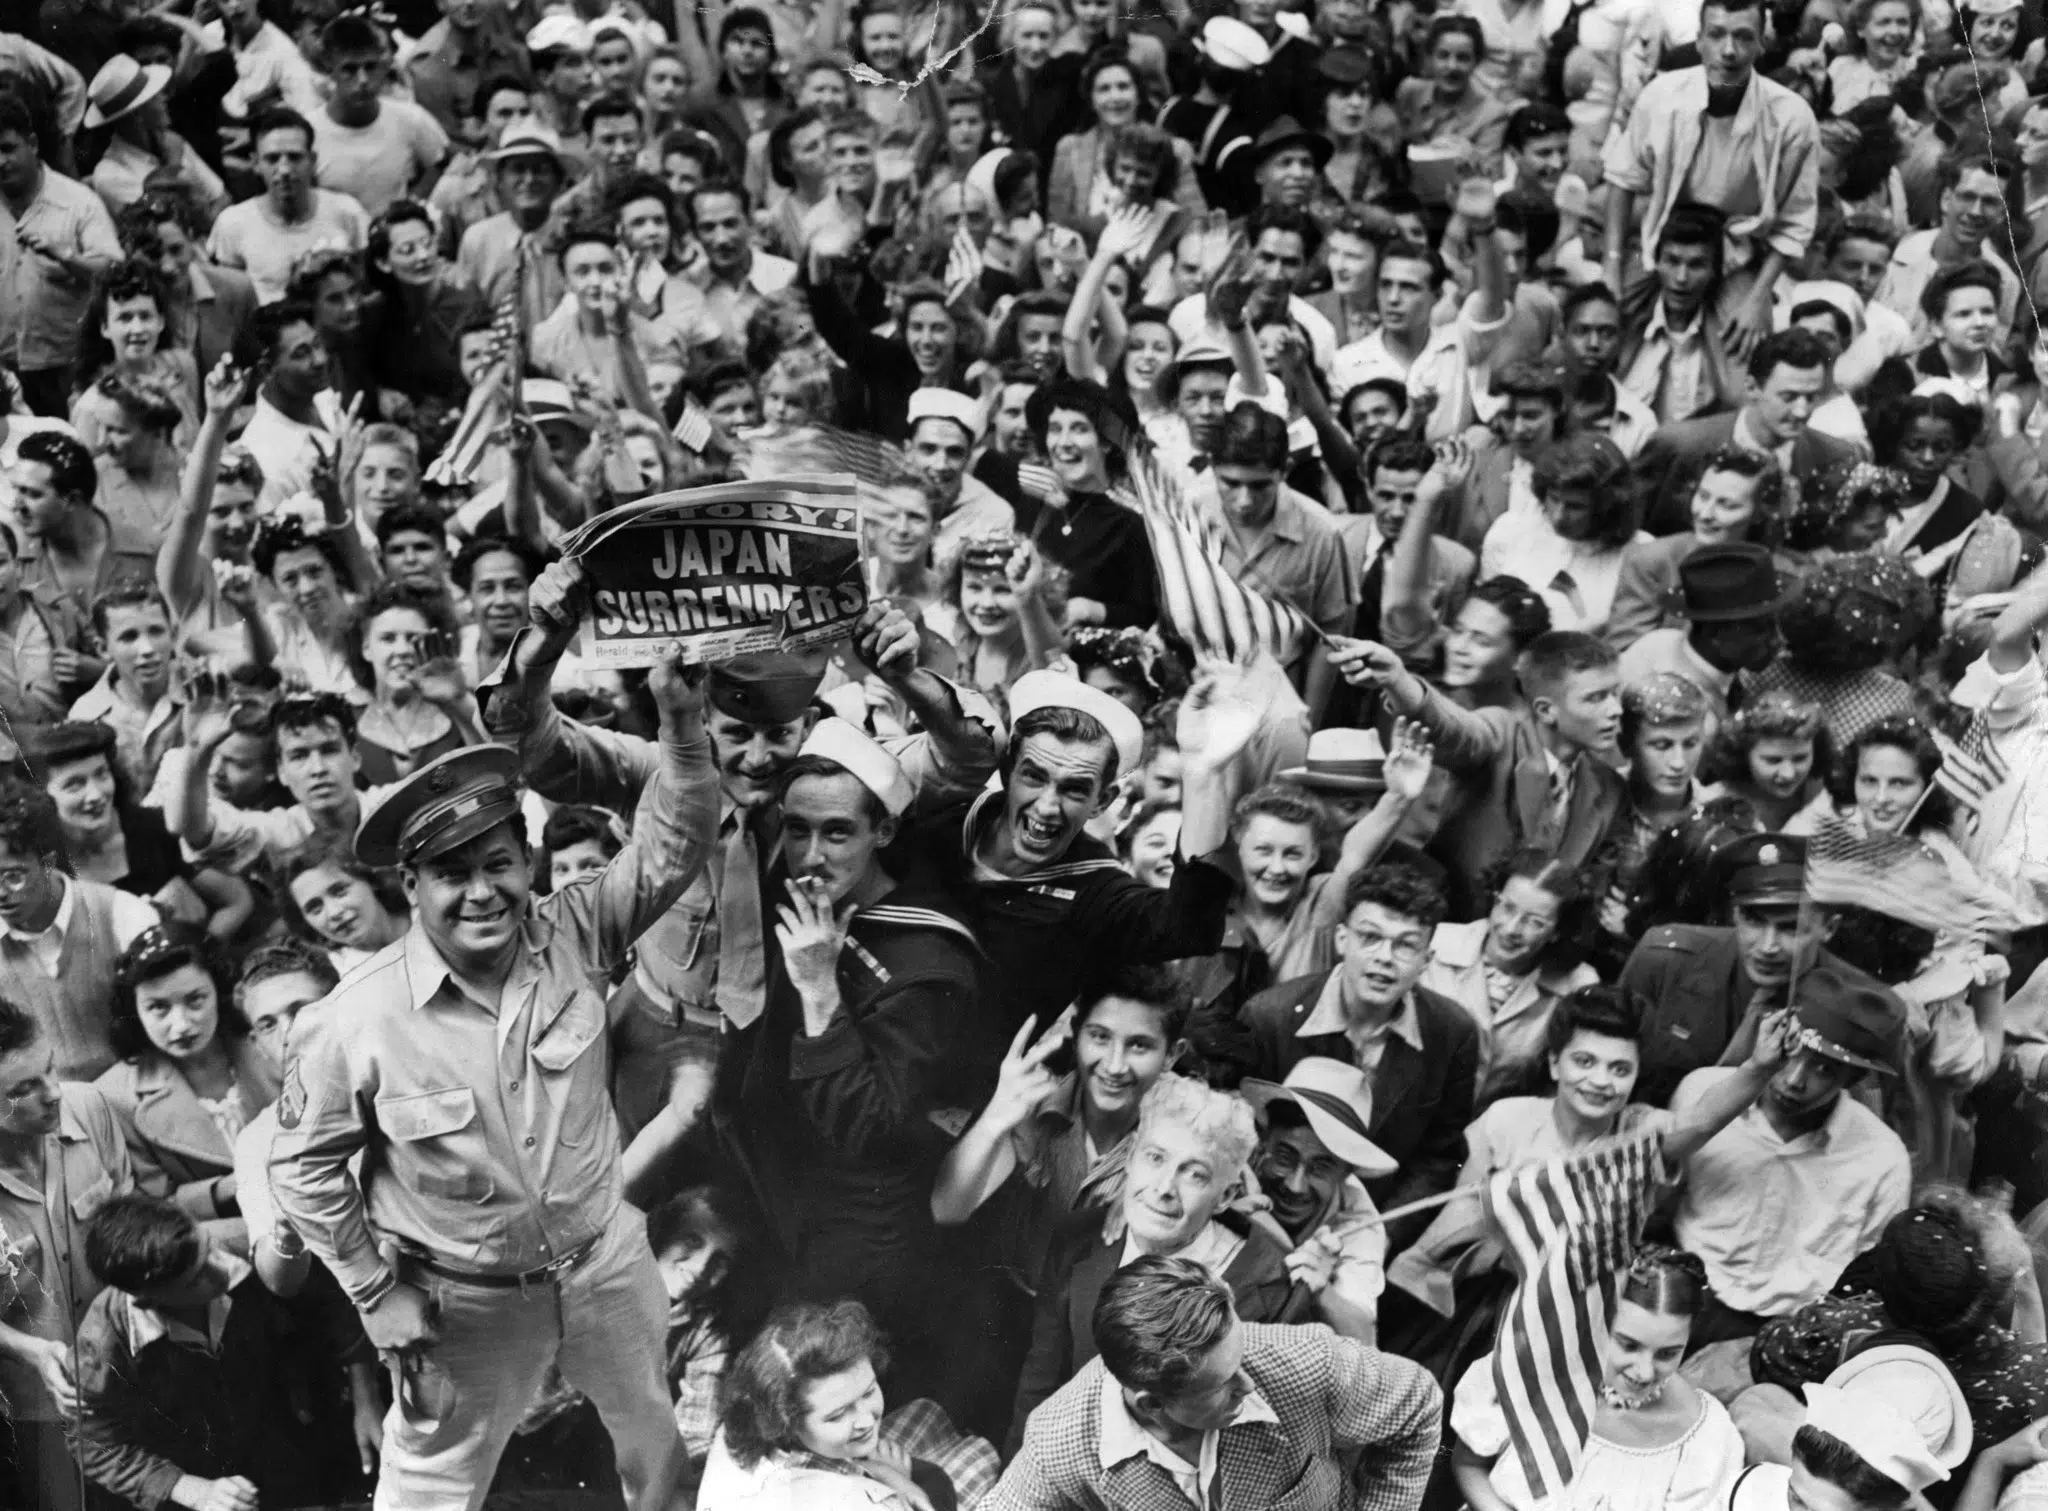 Museum of the American G.I in College Station, Texas - Image of a crowd of Americans celebrating the victory victory over japan day world war